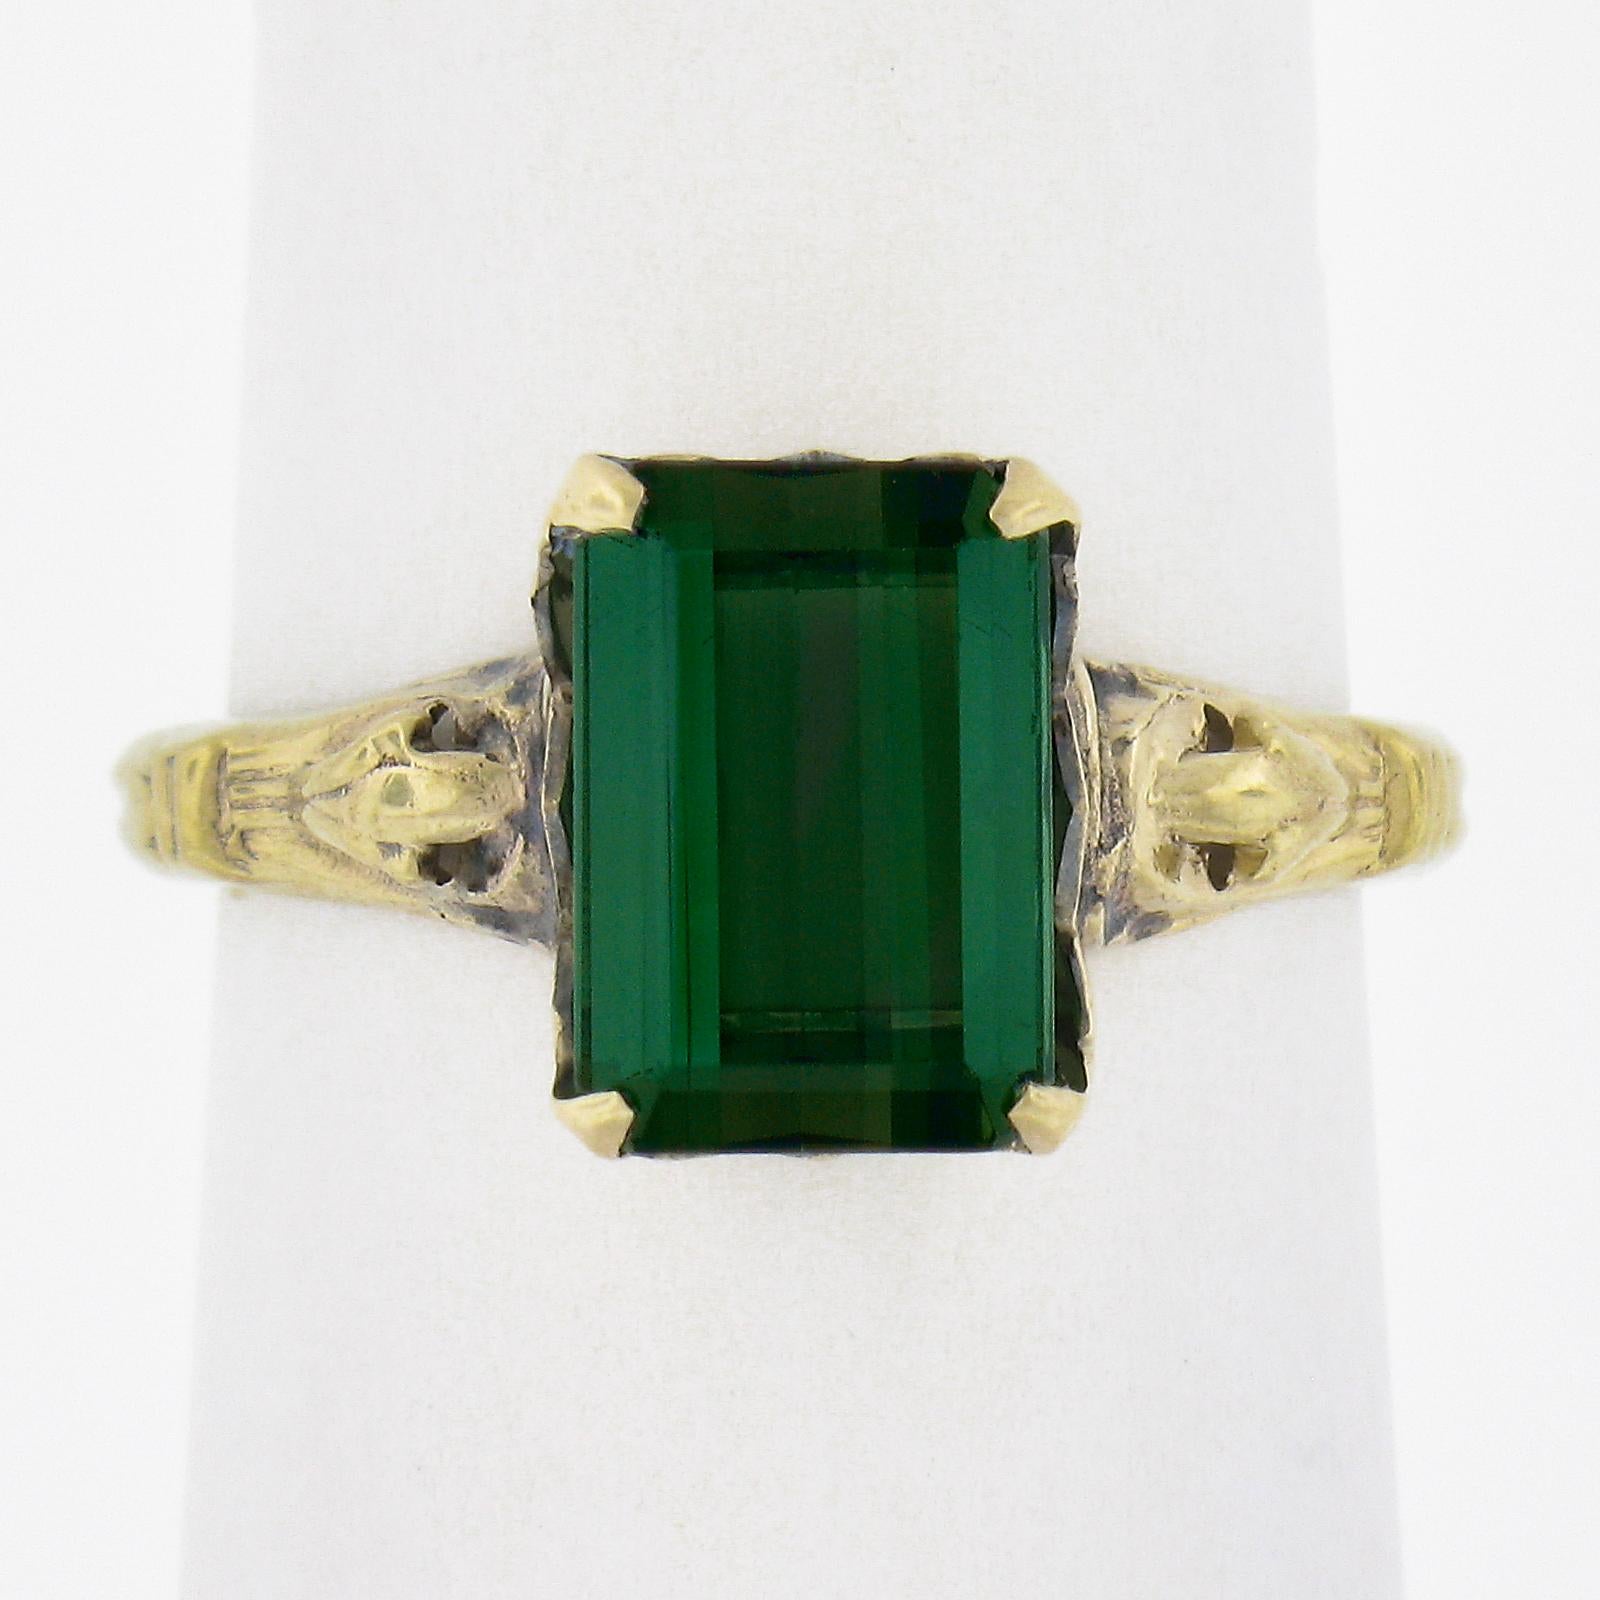 --Stone(s):--
(1) Natural Genuine Tourmaline - Emerald Cut - Claw Prong Set - Lively Clean Green Color - 9.8x6.6mm (approx.) - 2.64ct (exact)

Material: Solid 10K Yellow Gold 
Weight: 2.14 Grams
Ring Size: 6.5 (Fitted on a finger. We can custom size